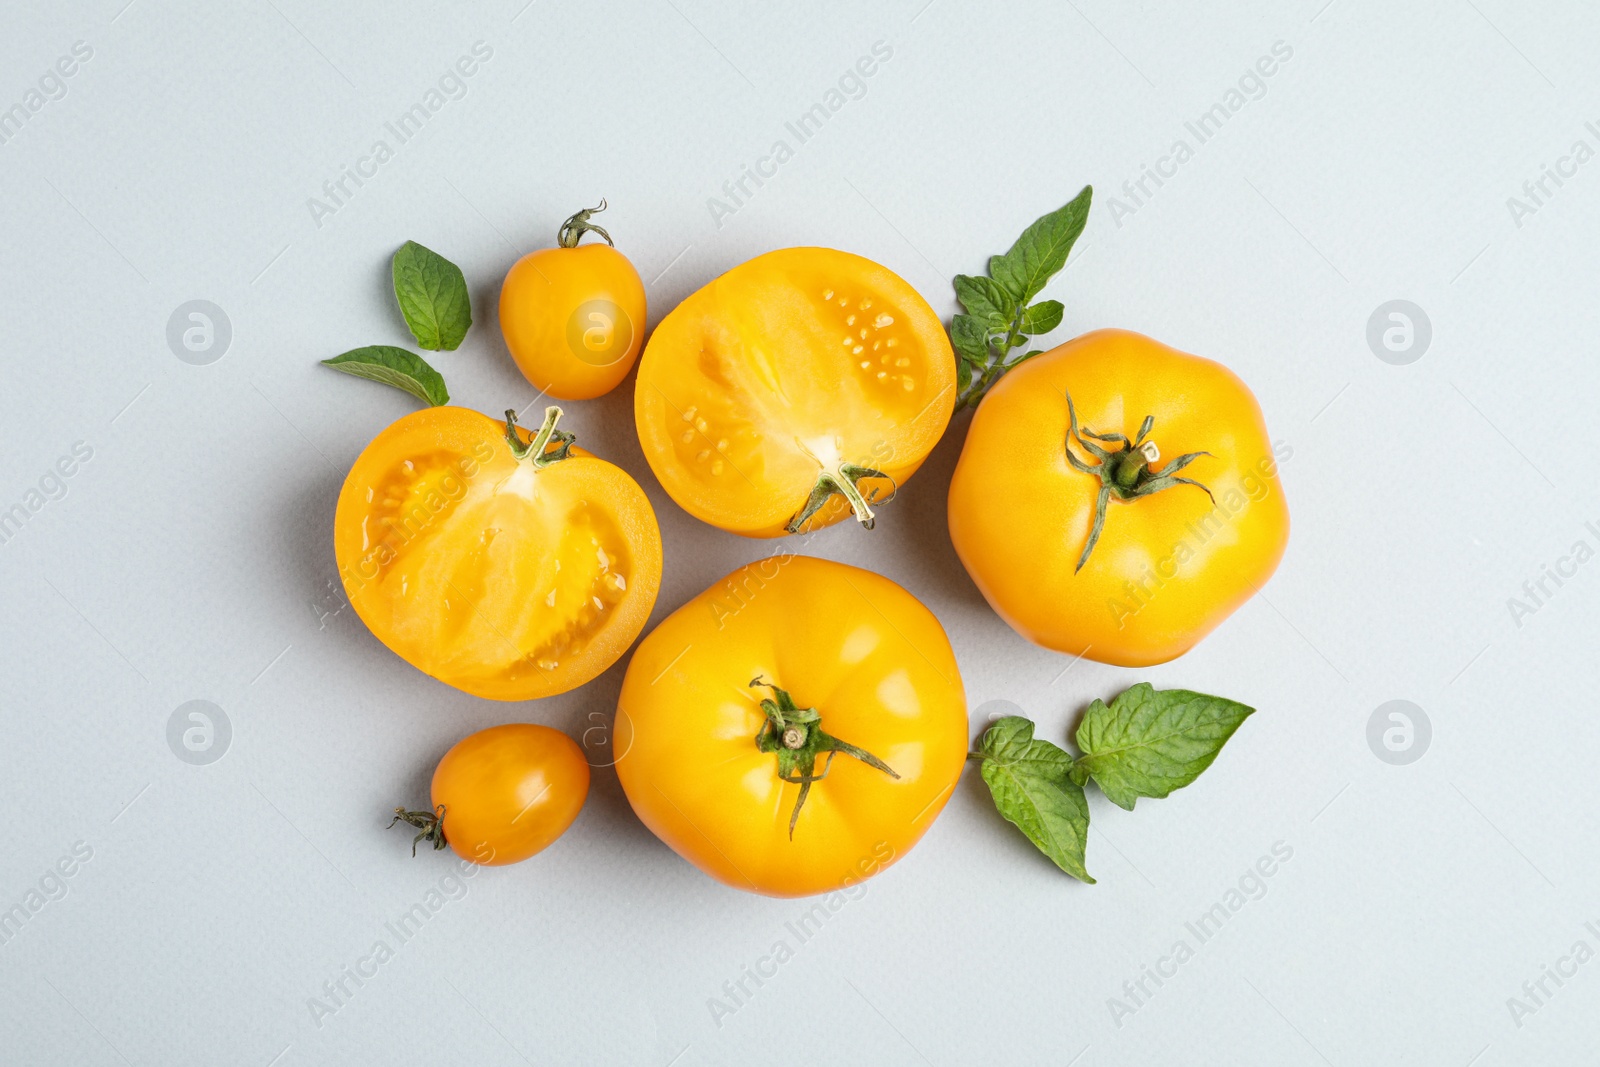 Photo of Cut and whole ripe yellow tomatoes with leaves on light background, flat lay